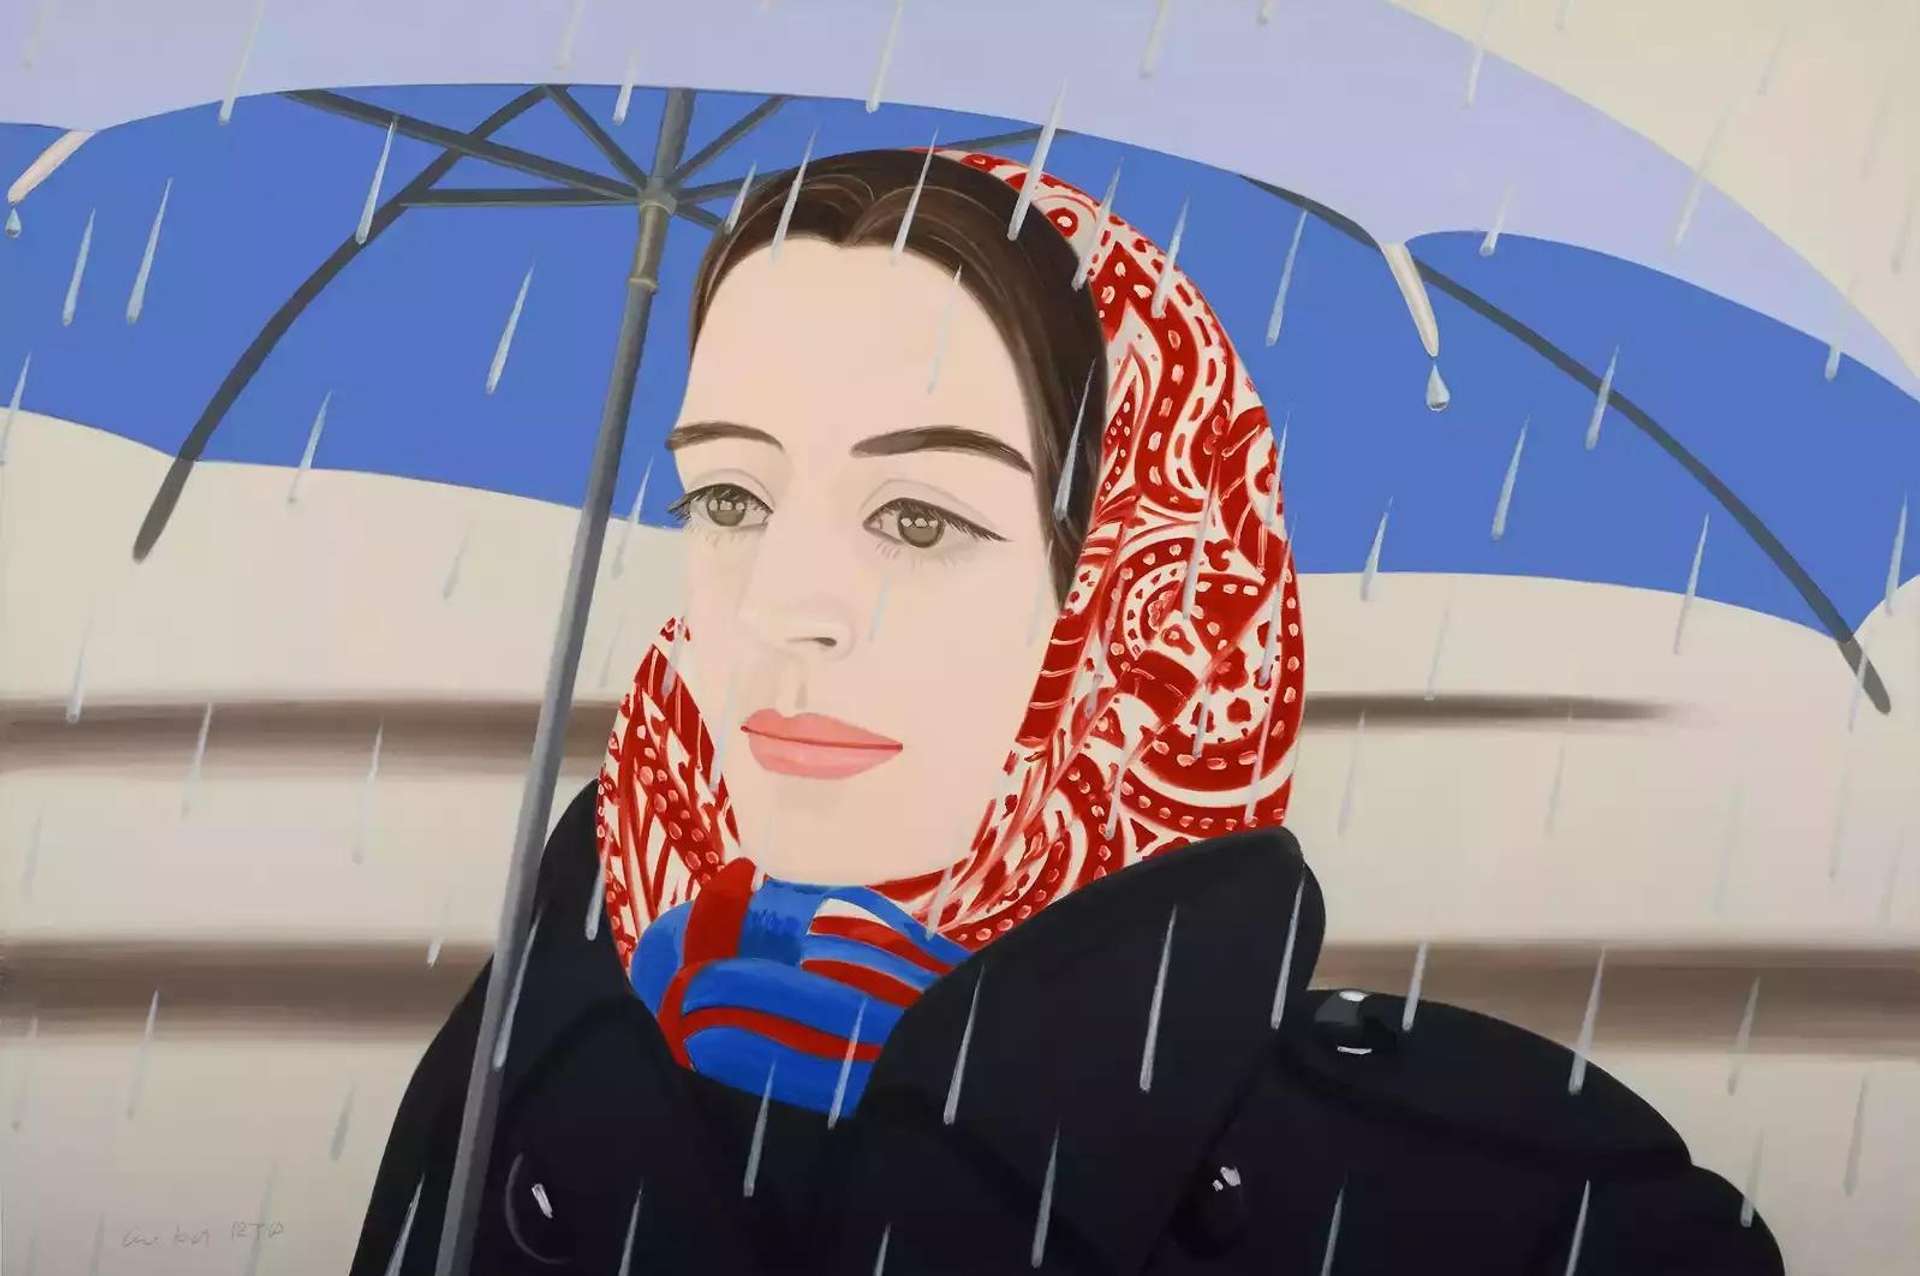  A woman in a red head scarf holds a blue umbrella over her head, with rain pouring down.